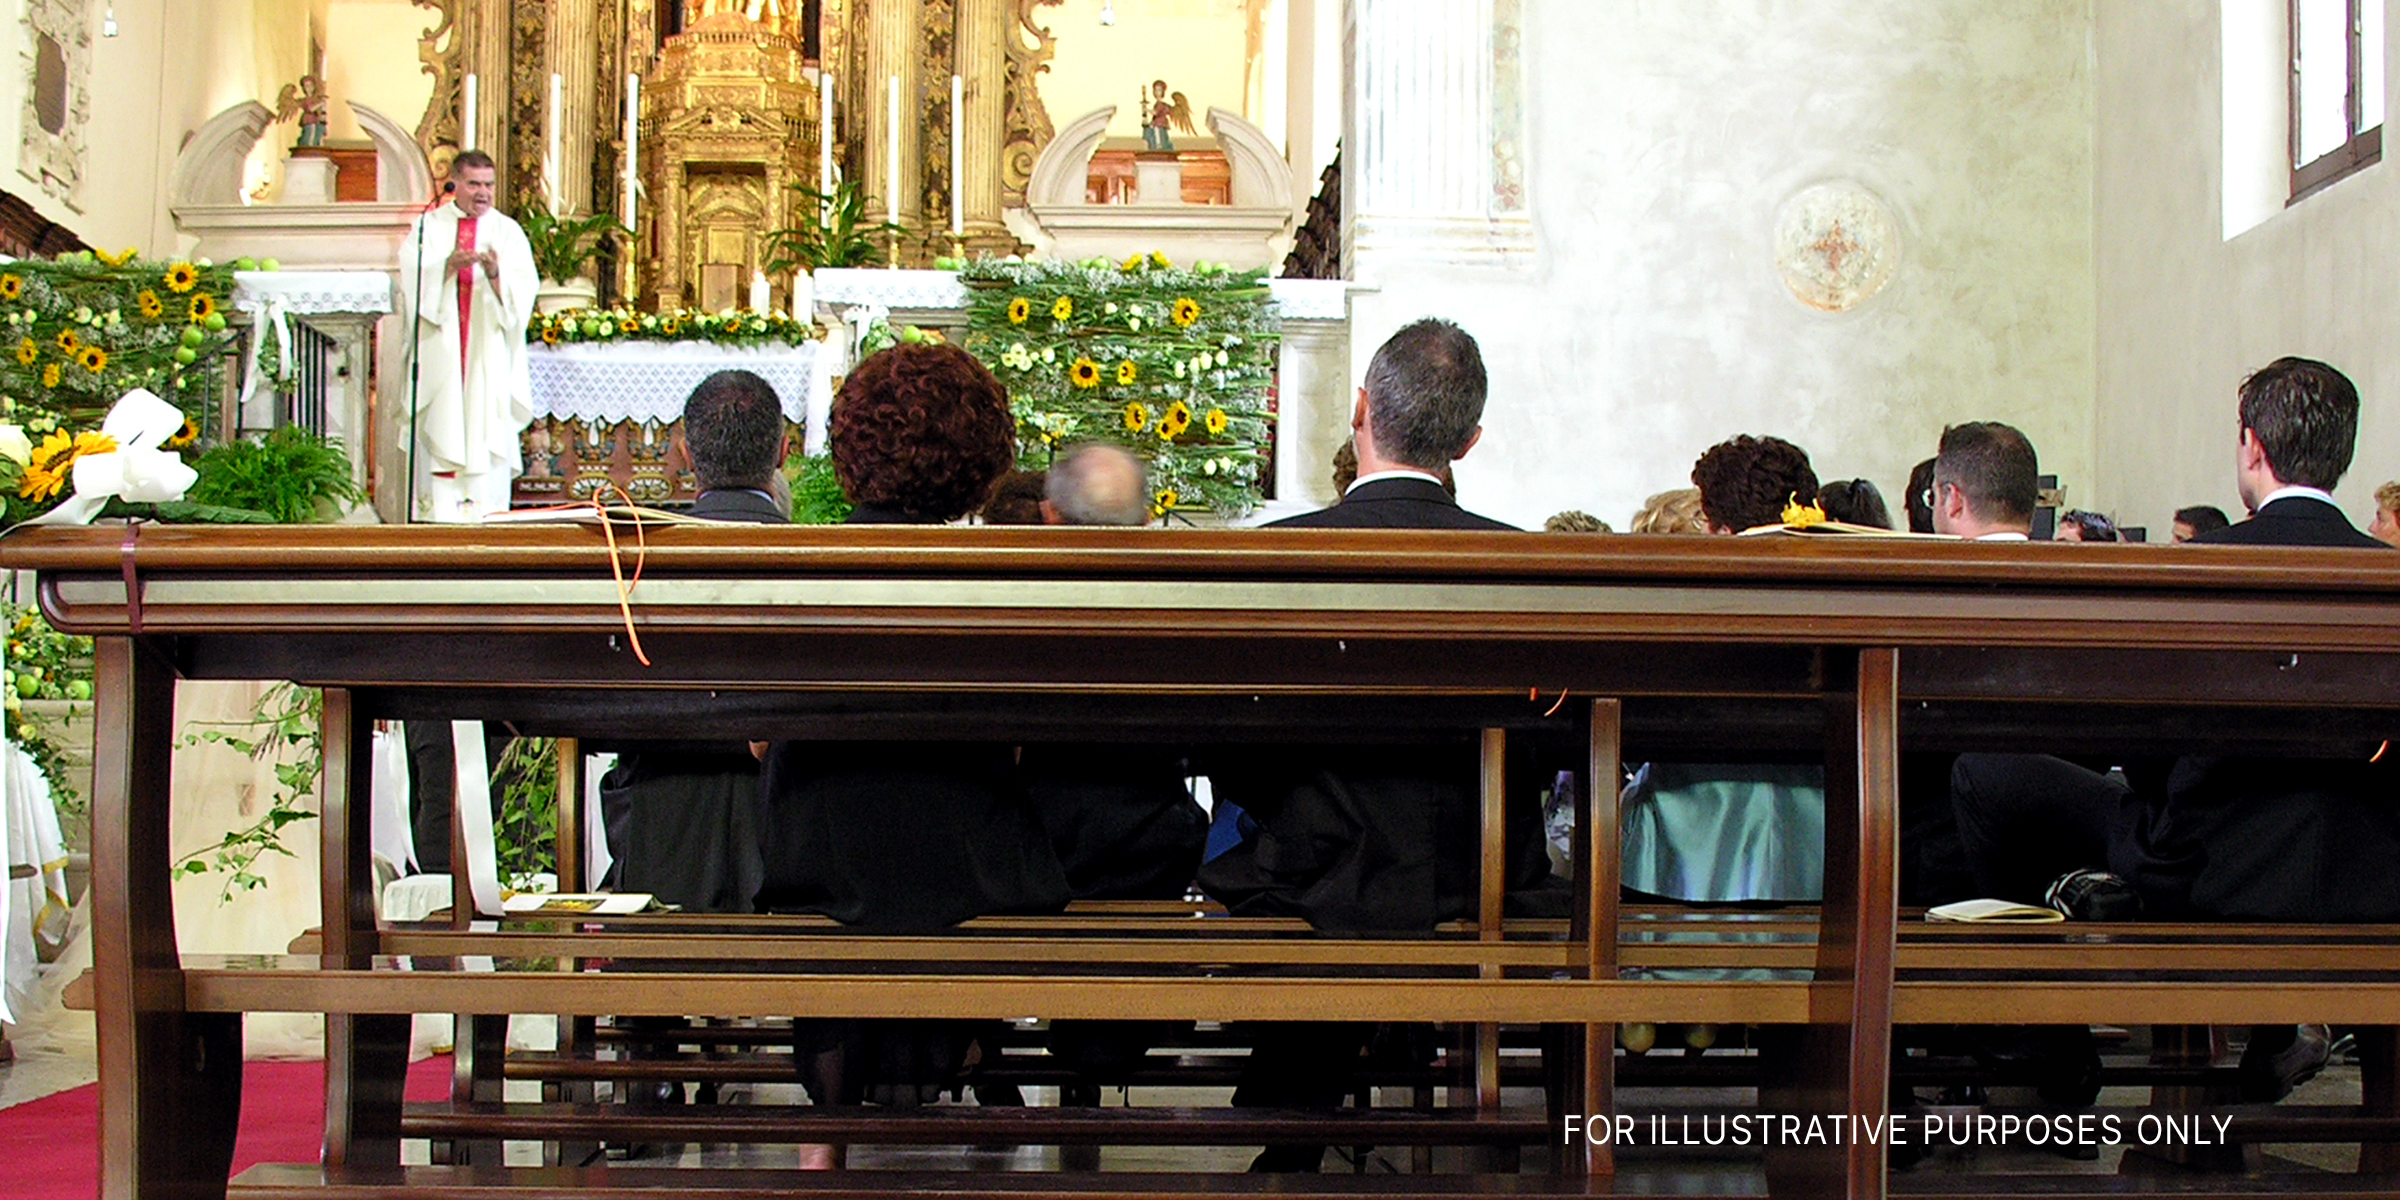 People sitting in a church | Source: Flickr